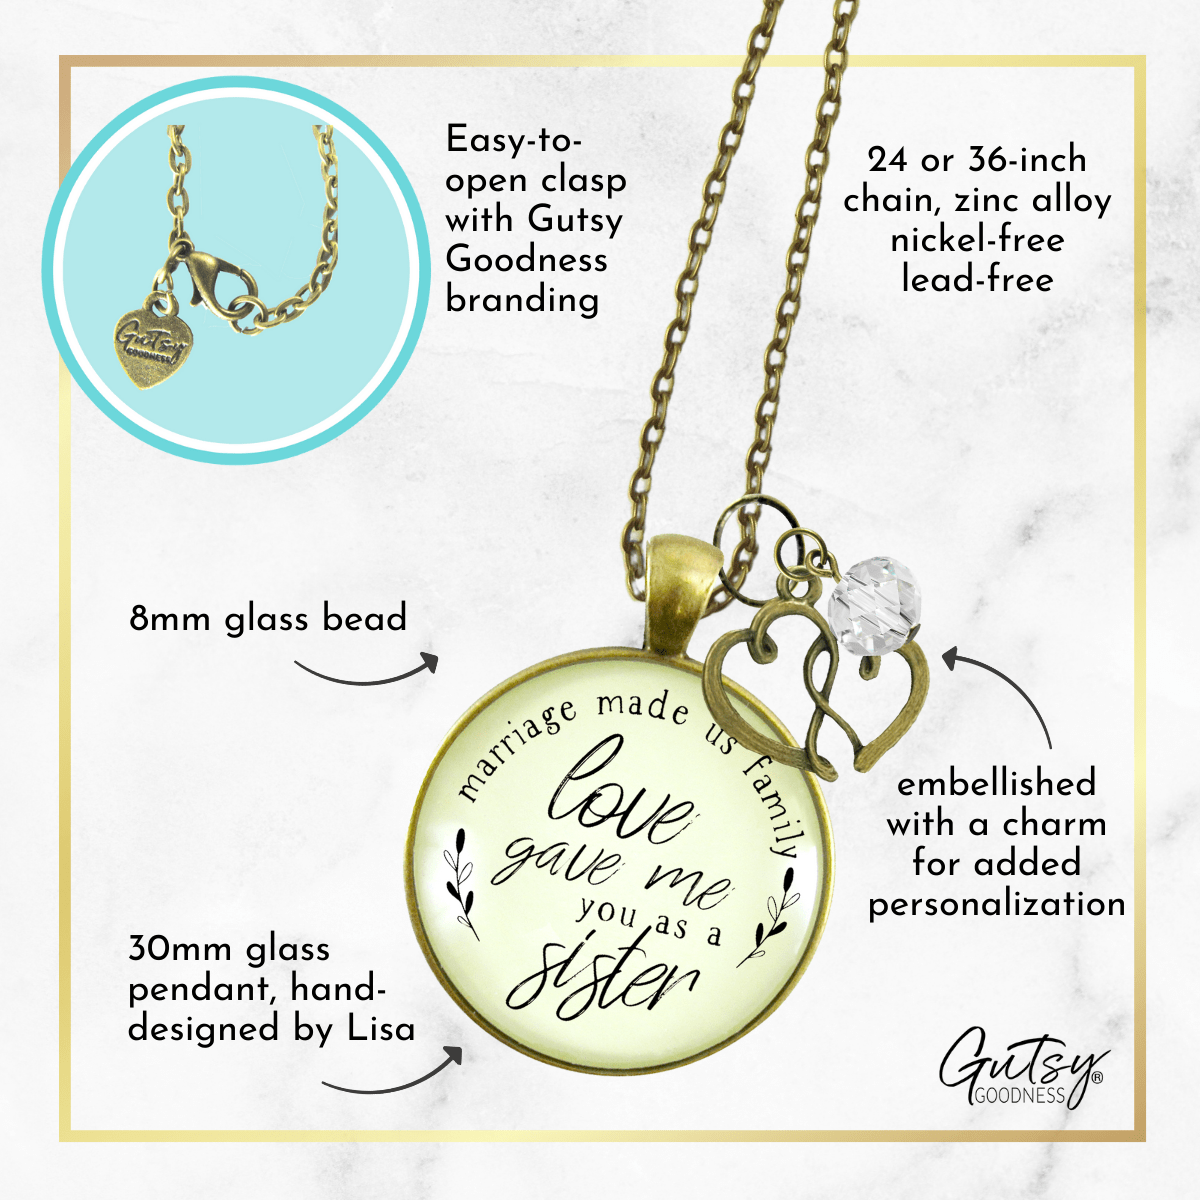 Gutsy Goodness Sister in Law Necklace Marriage Family Quote Wedding Jewelry Gift - Gutsy Goodness Handmade Jewelry;Sister In Law Necklace Marriage Family Quote Wedding Jewelry Gift - Gutsy Goodness Handmade Jewelry Gifts